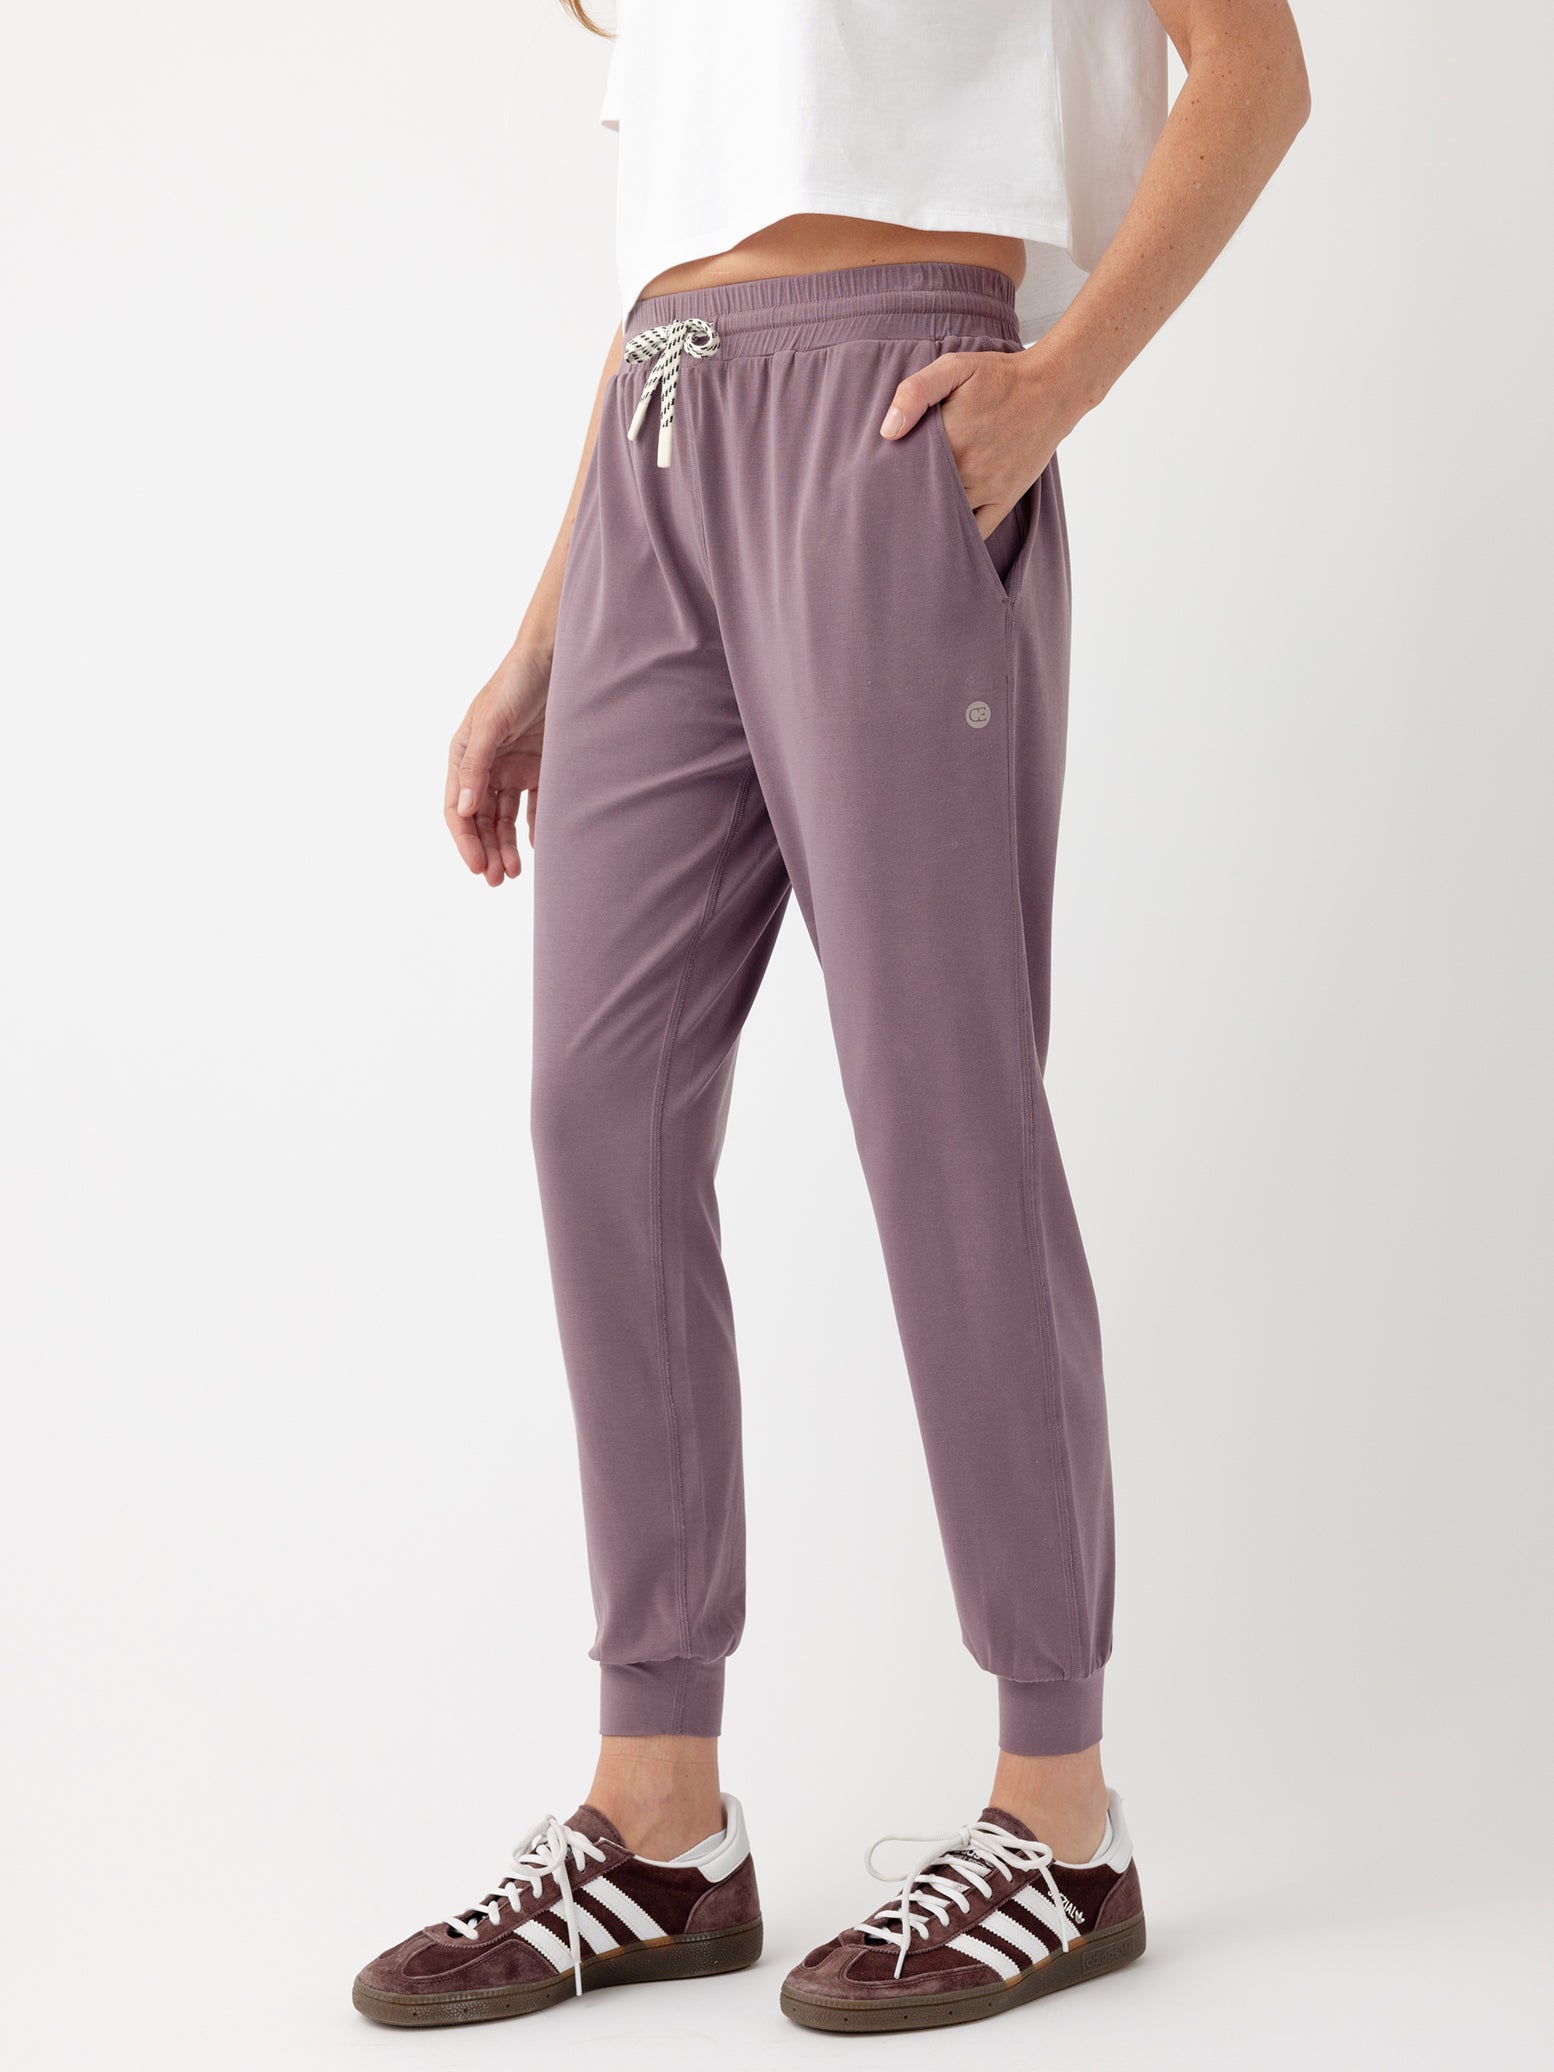 Twilight Studio Jogger. The Studio Joggers are worn by a woman photographed with a white background. 